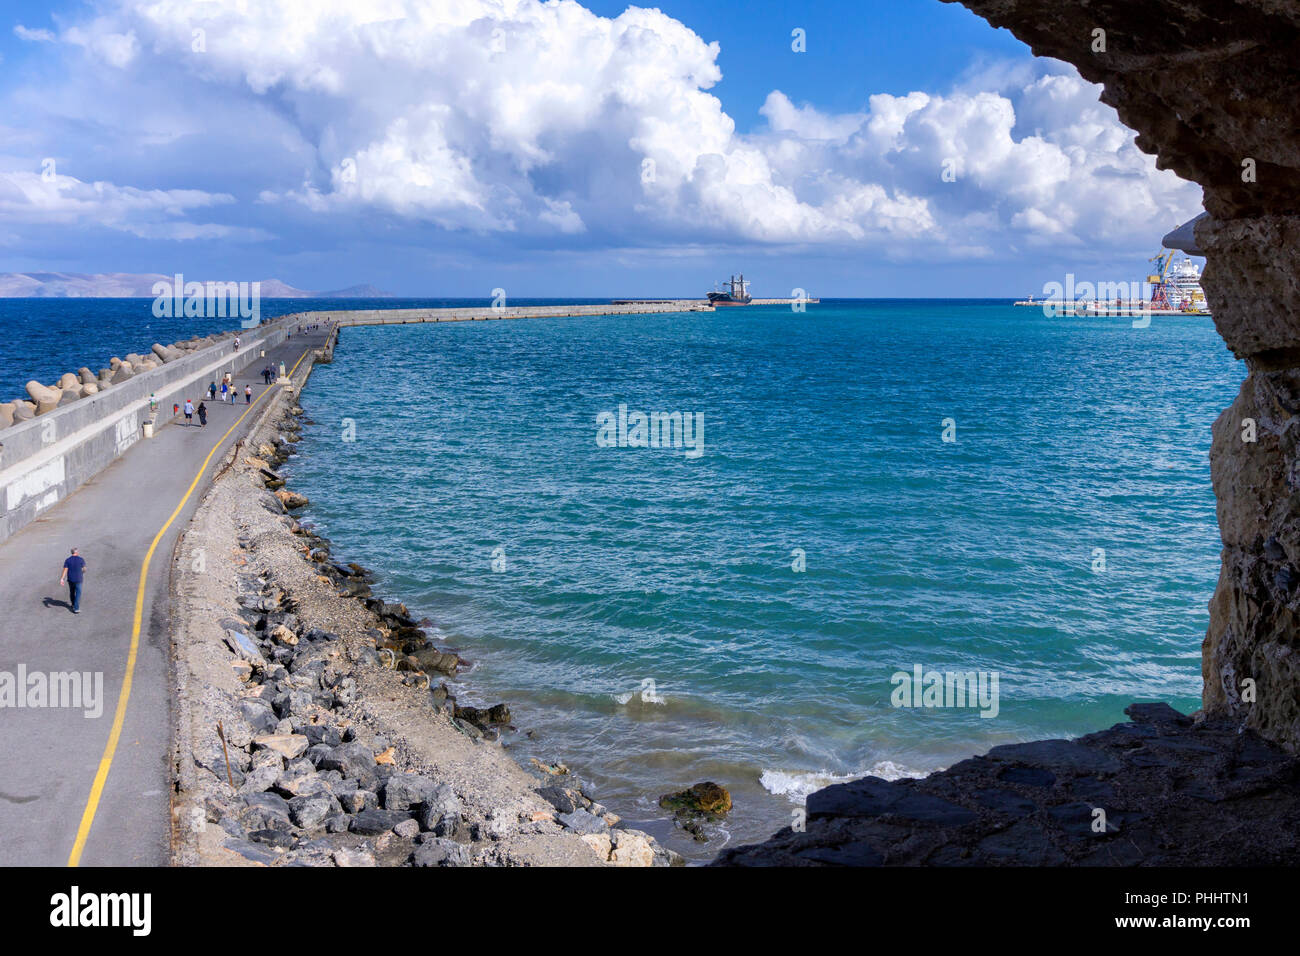 Heraklion, Crete Island - Greece. View from the walls of the Venetian fortress Koules (Castello a Mare) Stock Photo